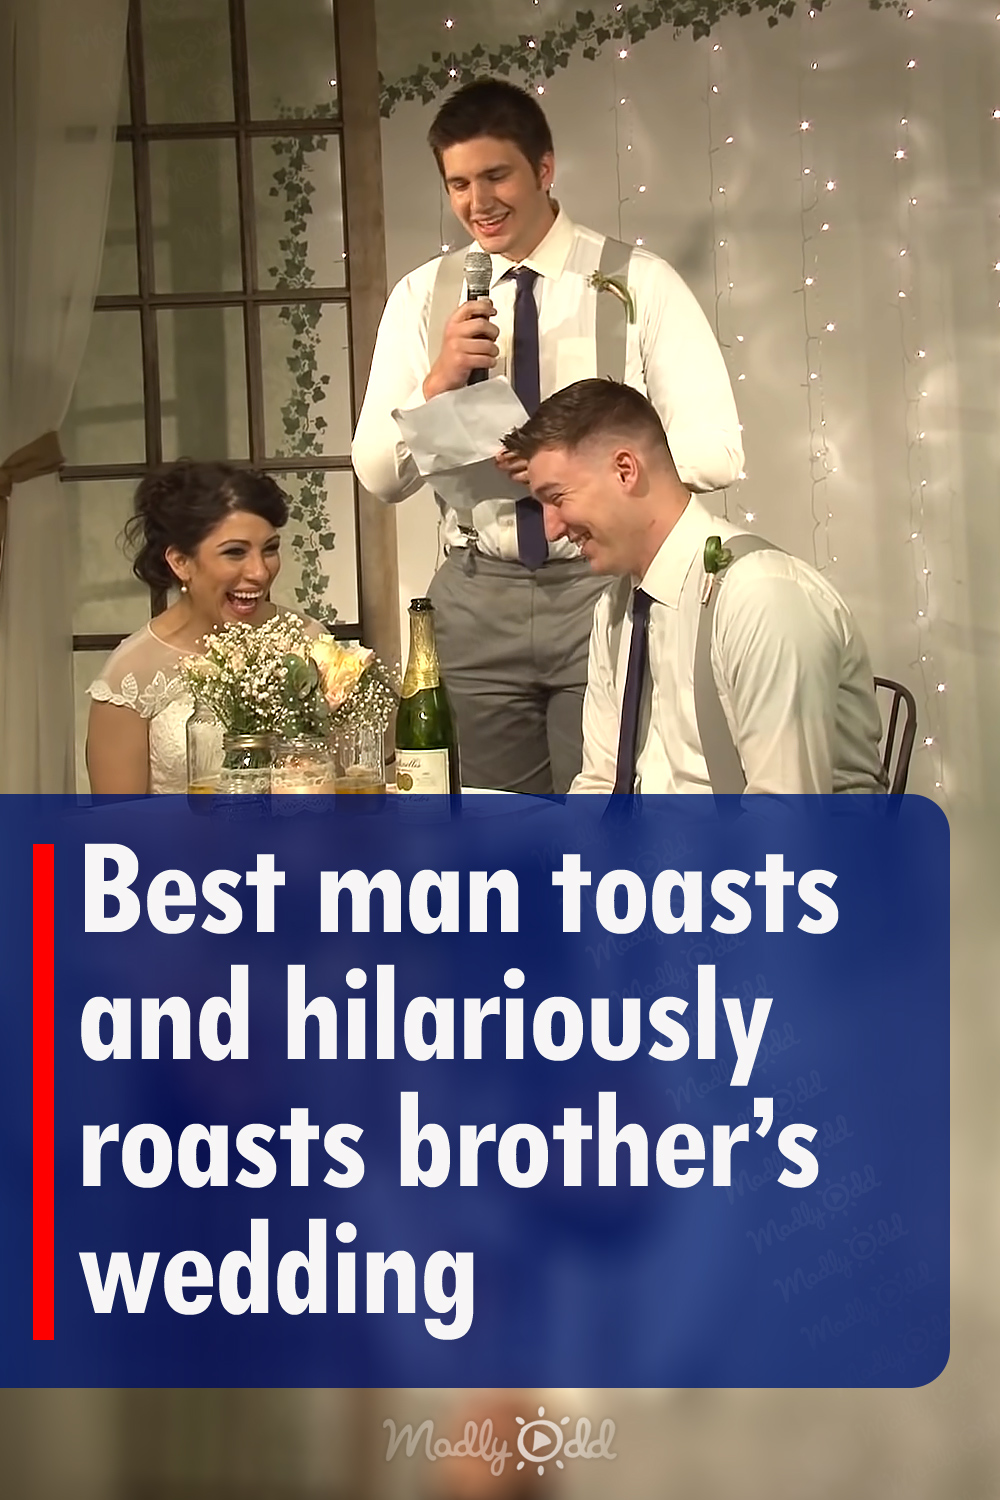 Best man toasts and hilariously roasts brother’s wedding